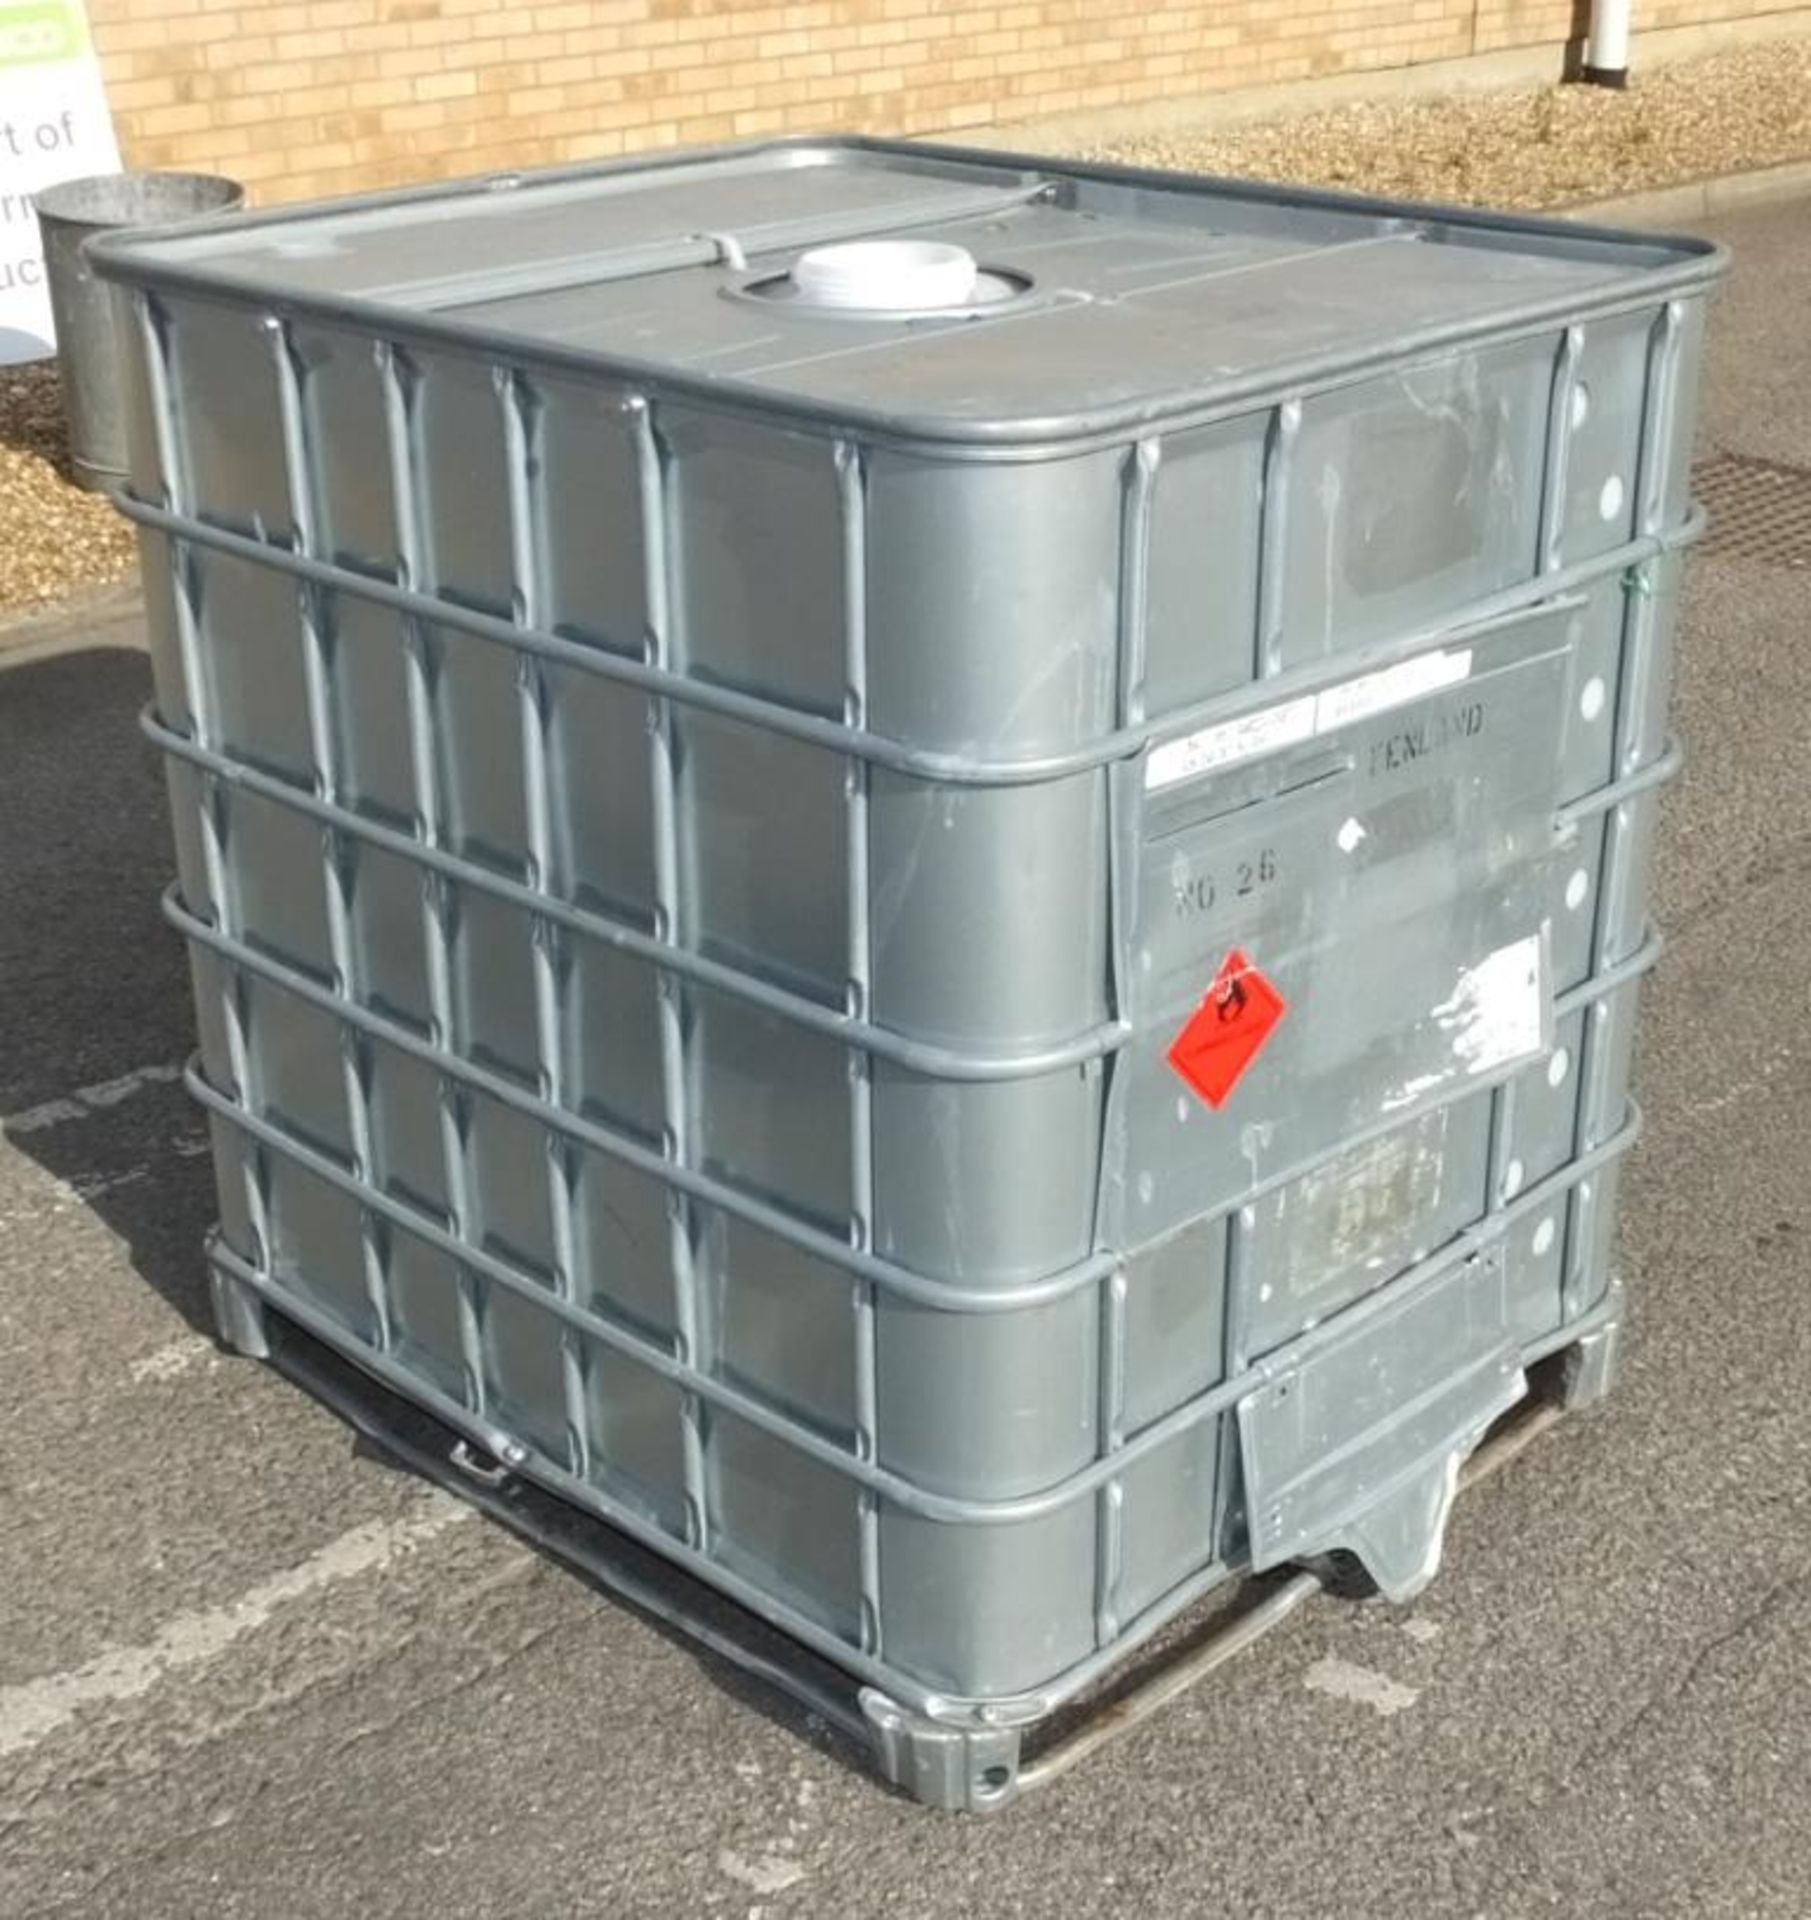 1000LTR IBC Storage tank in frame - W 1200mm x D 1000mm x H 1170mm - Image 2 of 5